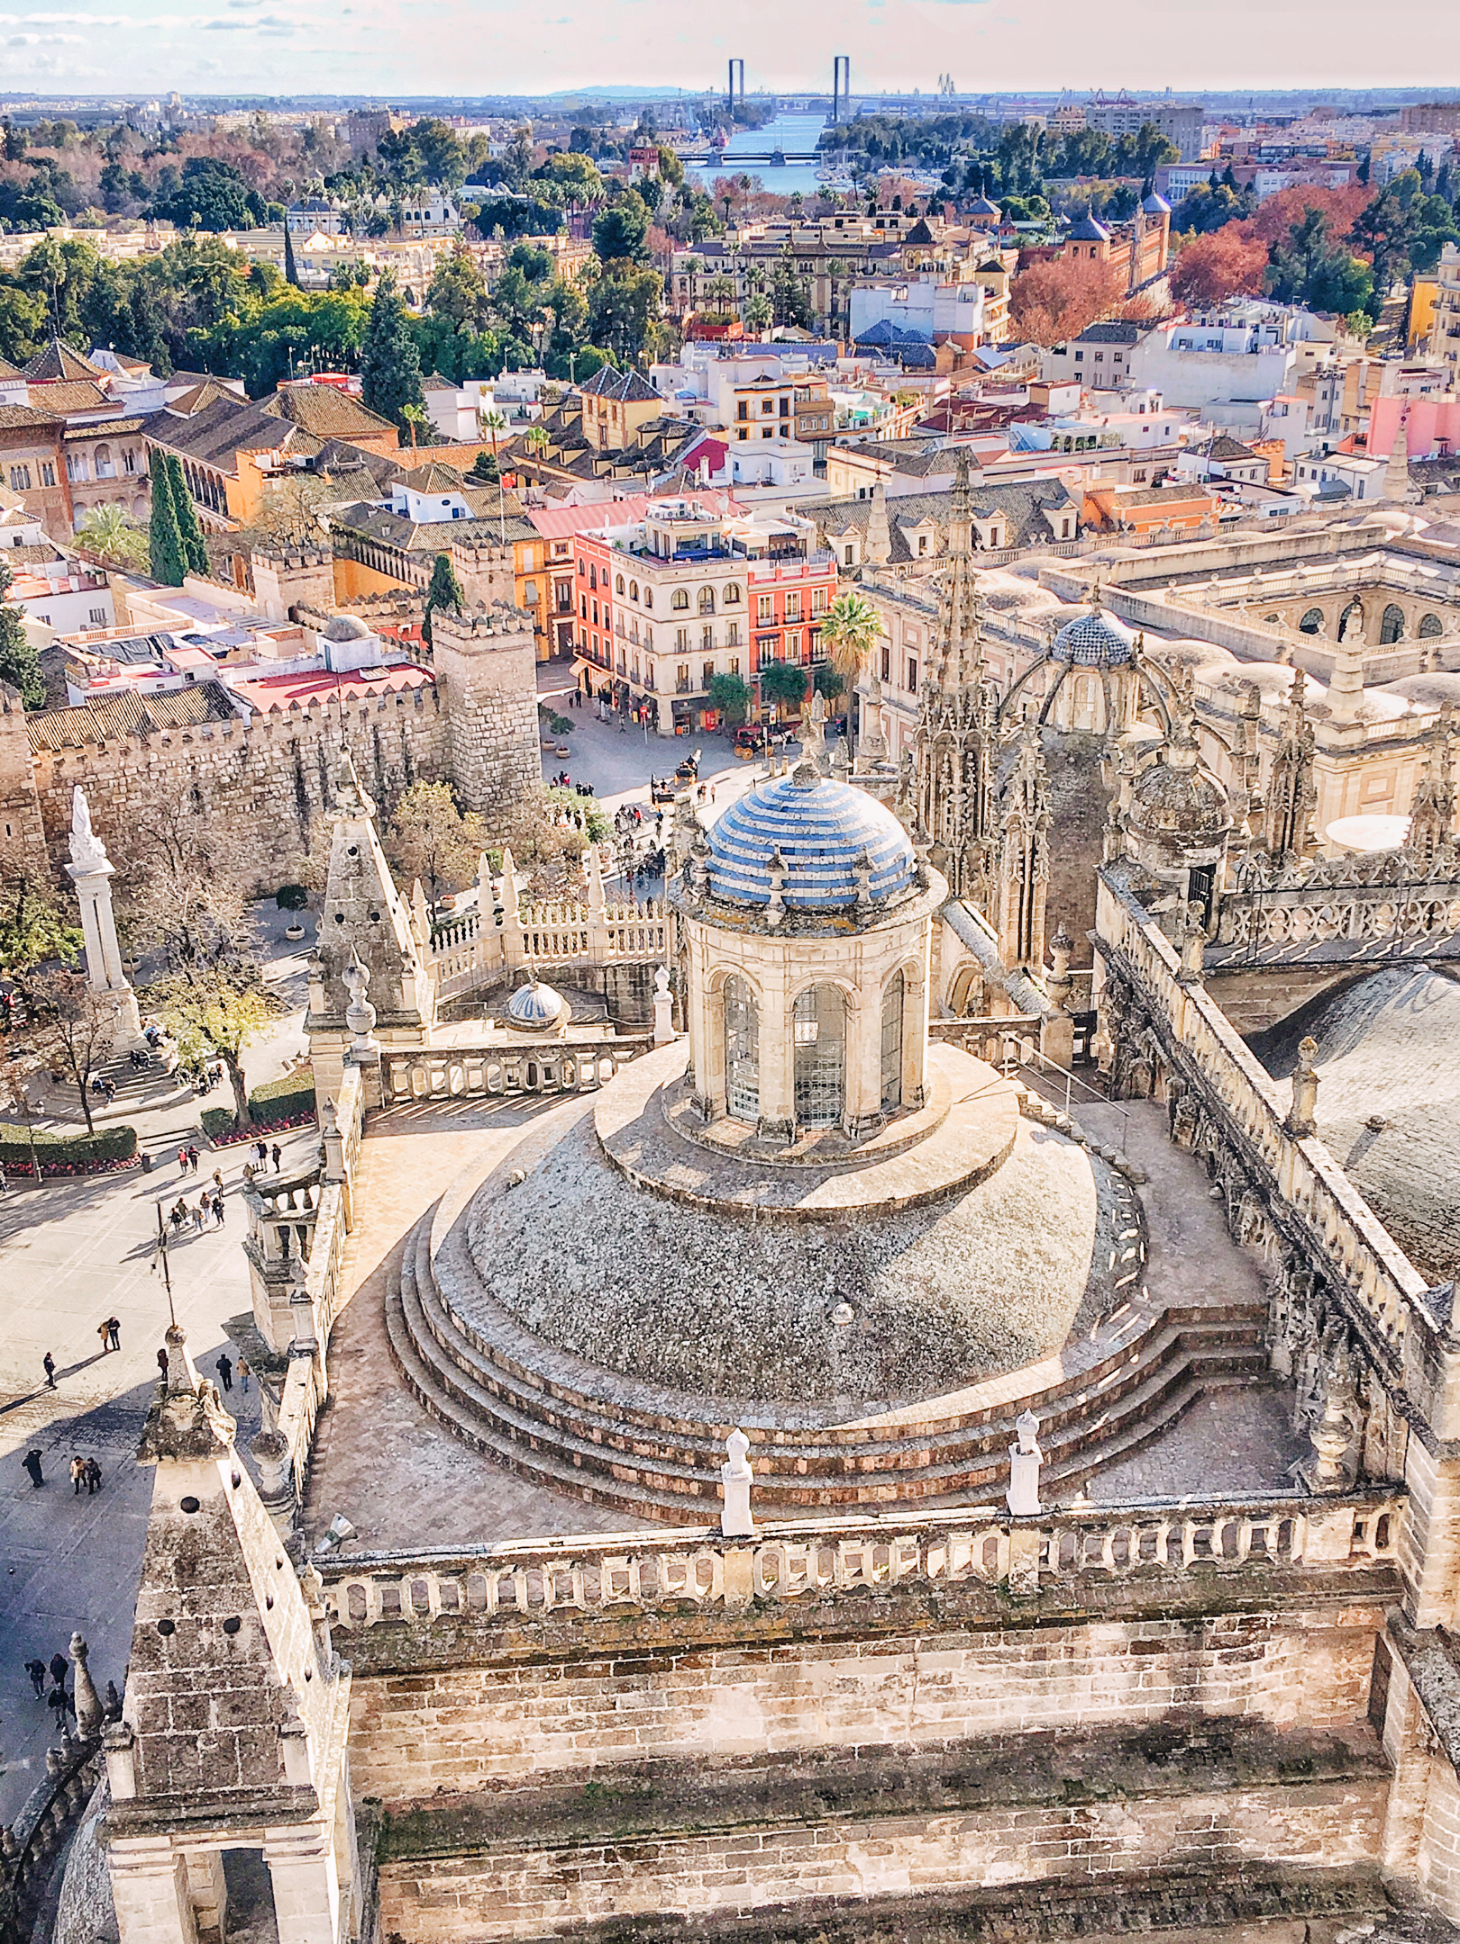 Views from the Giralda Tower in Seville